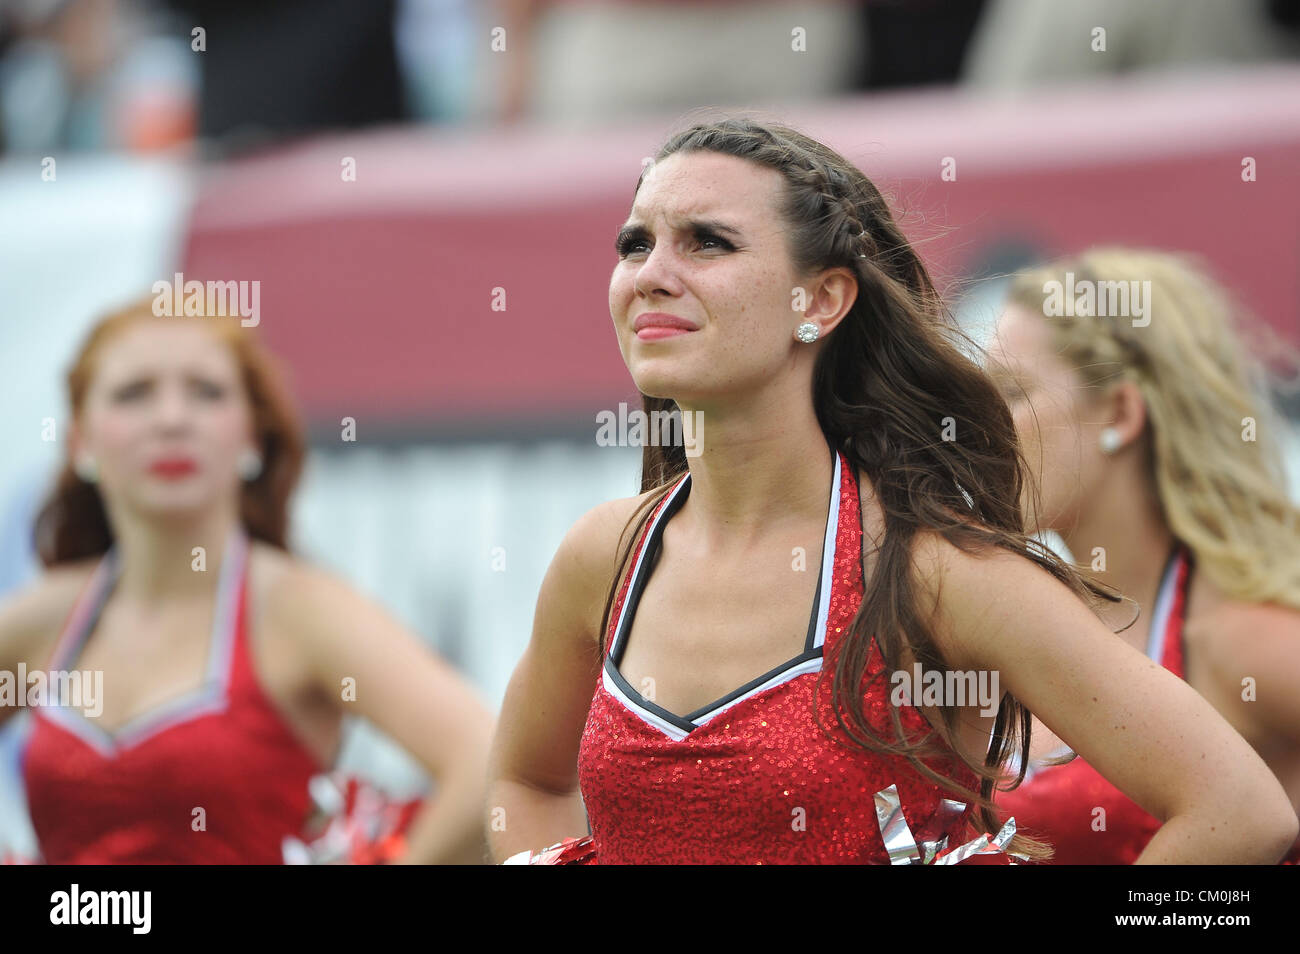 Sept. 8, 2012 - Philadelphia, Pennsylvania, USA - A Maryland cheerleader. In a game being played at Lincoln Financial Field in Philadelphia, Pennsylvania. Maryland defeats Temple by a score of 36-27 (Credit Image: © Mike McAtee/ZUMAPRESS.com) Stock Photo